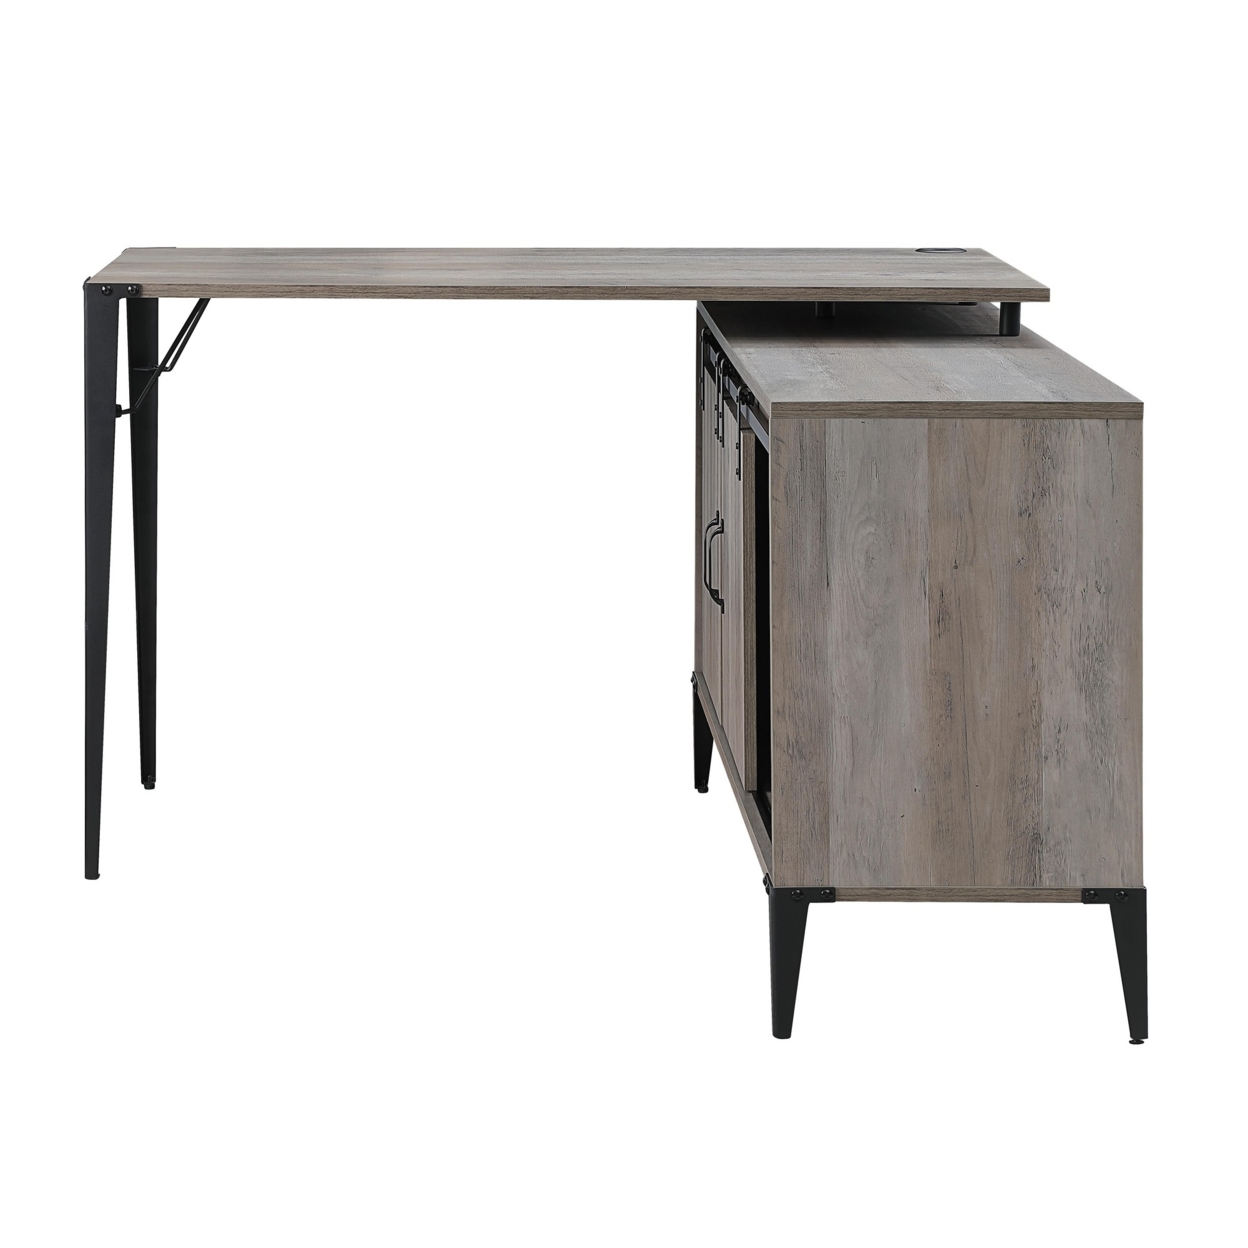 Writing Desk With With Metal Leg And Cord Management- Saltoro Sherpi